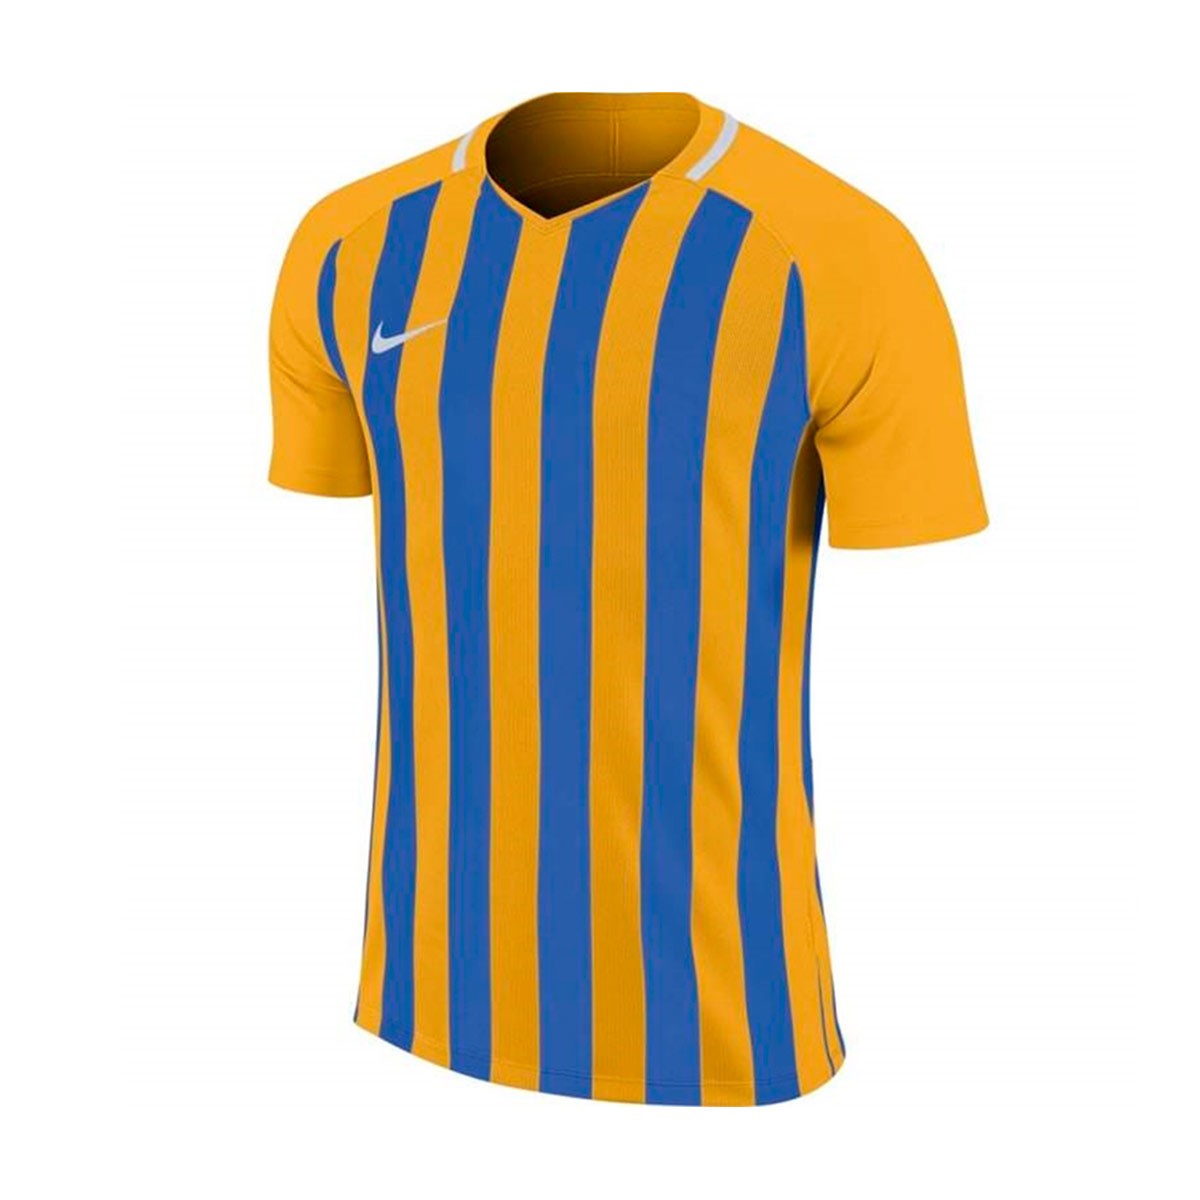 Jersey Nike Striped Division III m/c 